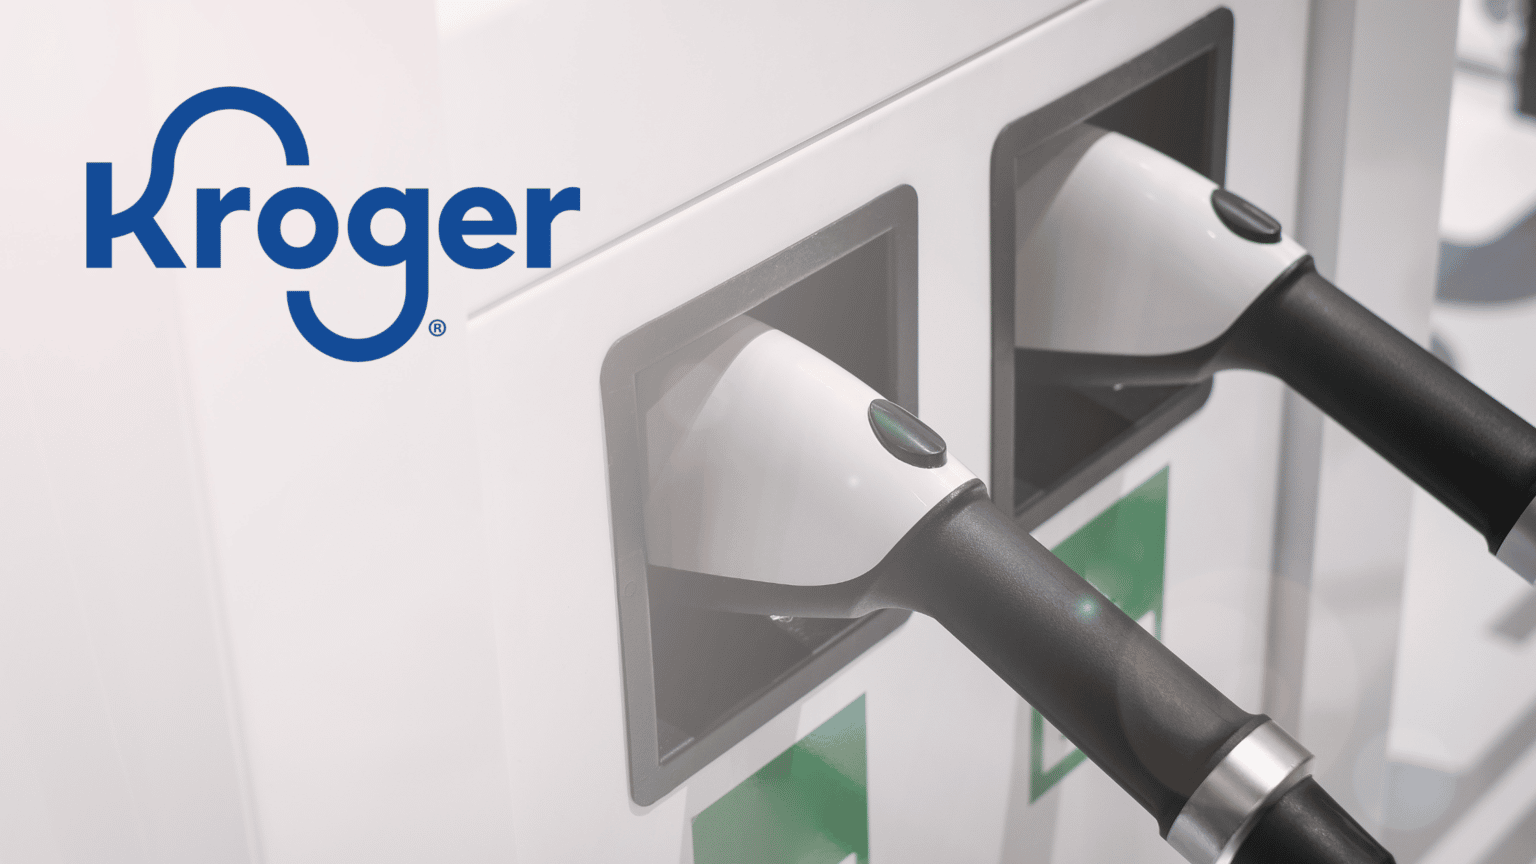 Kroger Expands Electric Vehicle Charging Access The EV Report